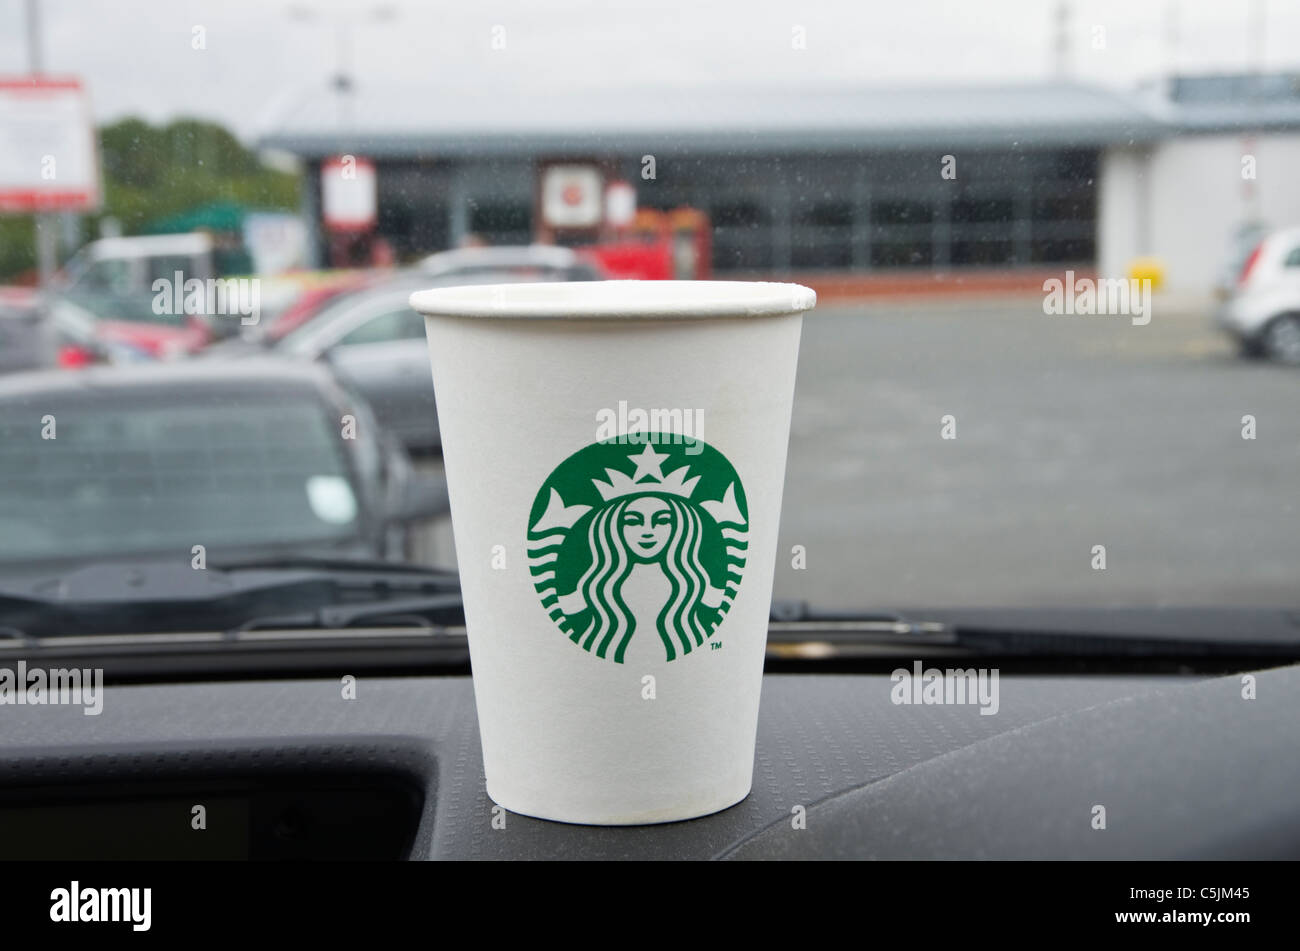 Starbucks disposable takeaway coffee to go in a takeout paper cup to-go with new logo on a car dashboard in a Motorway Service station. England, UK Stock Photo